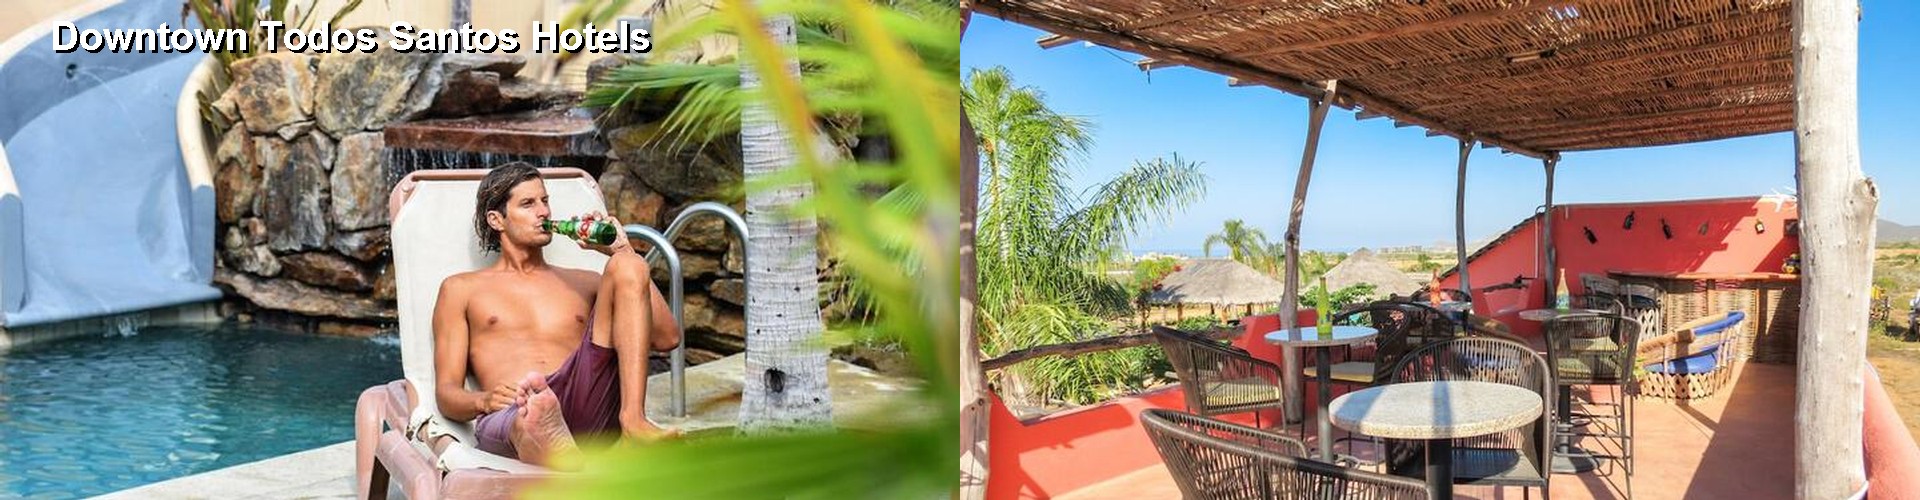 5 Best Hotels near Downtown Todos Santos